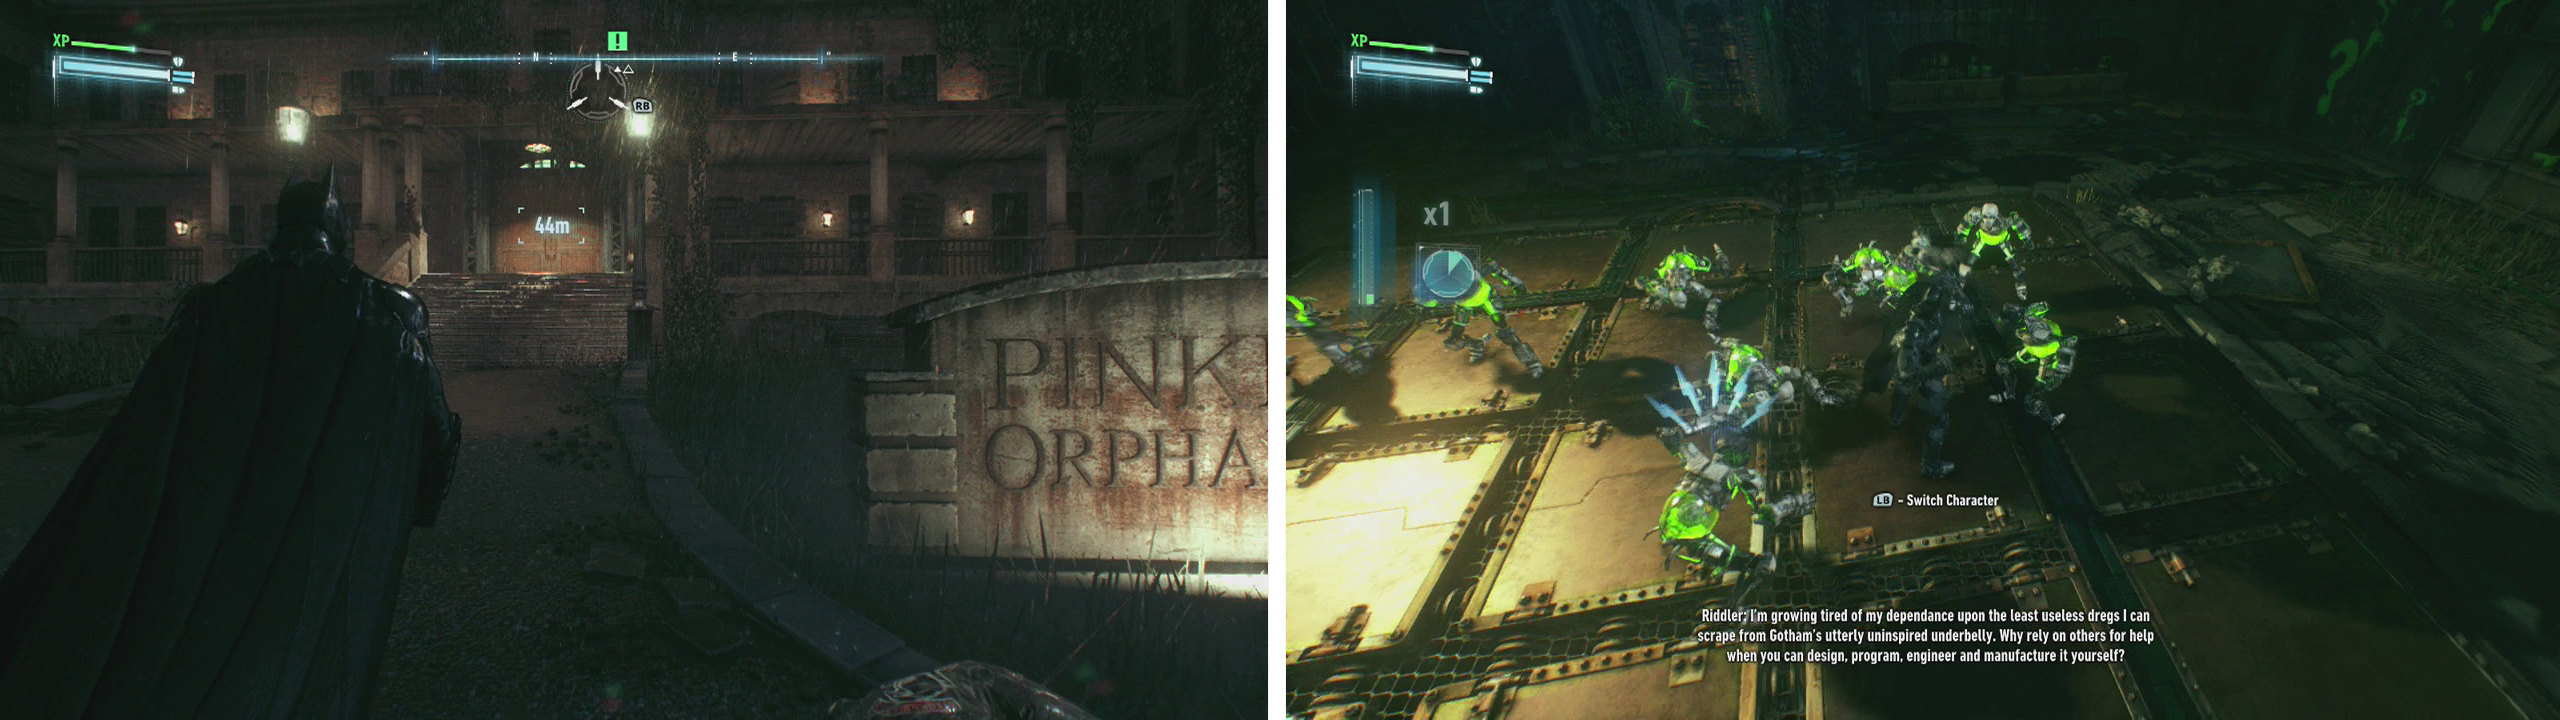 Make your way to Pinkney Orphanage (left). Inside youll need to fight off a group of Riddler Robots (right)